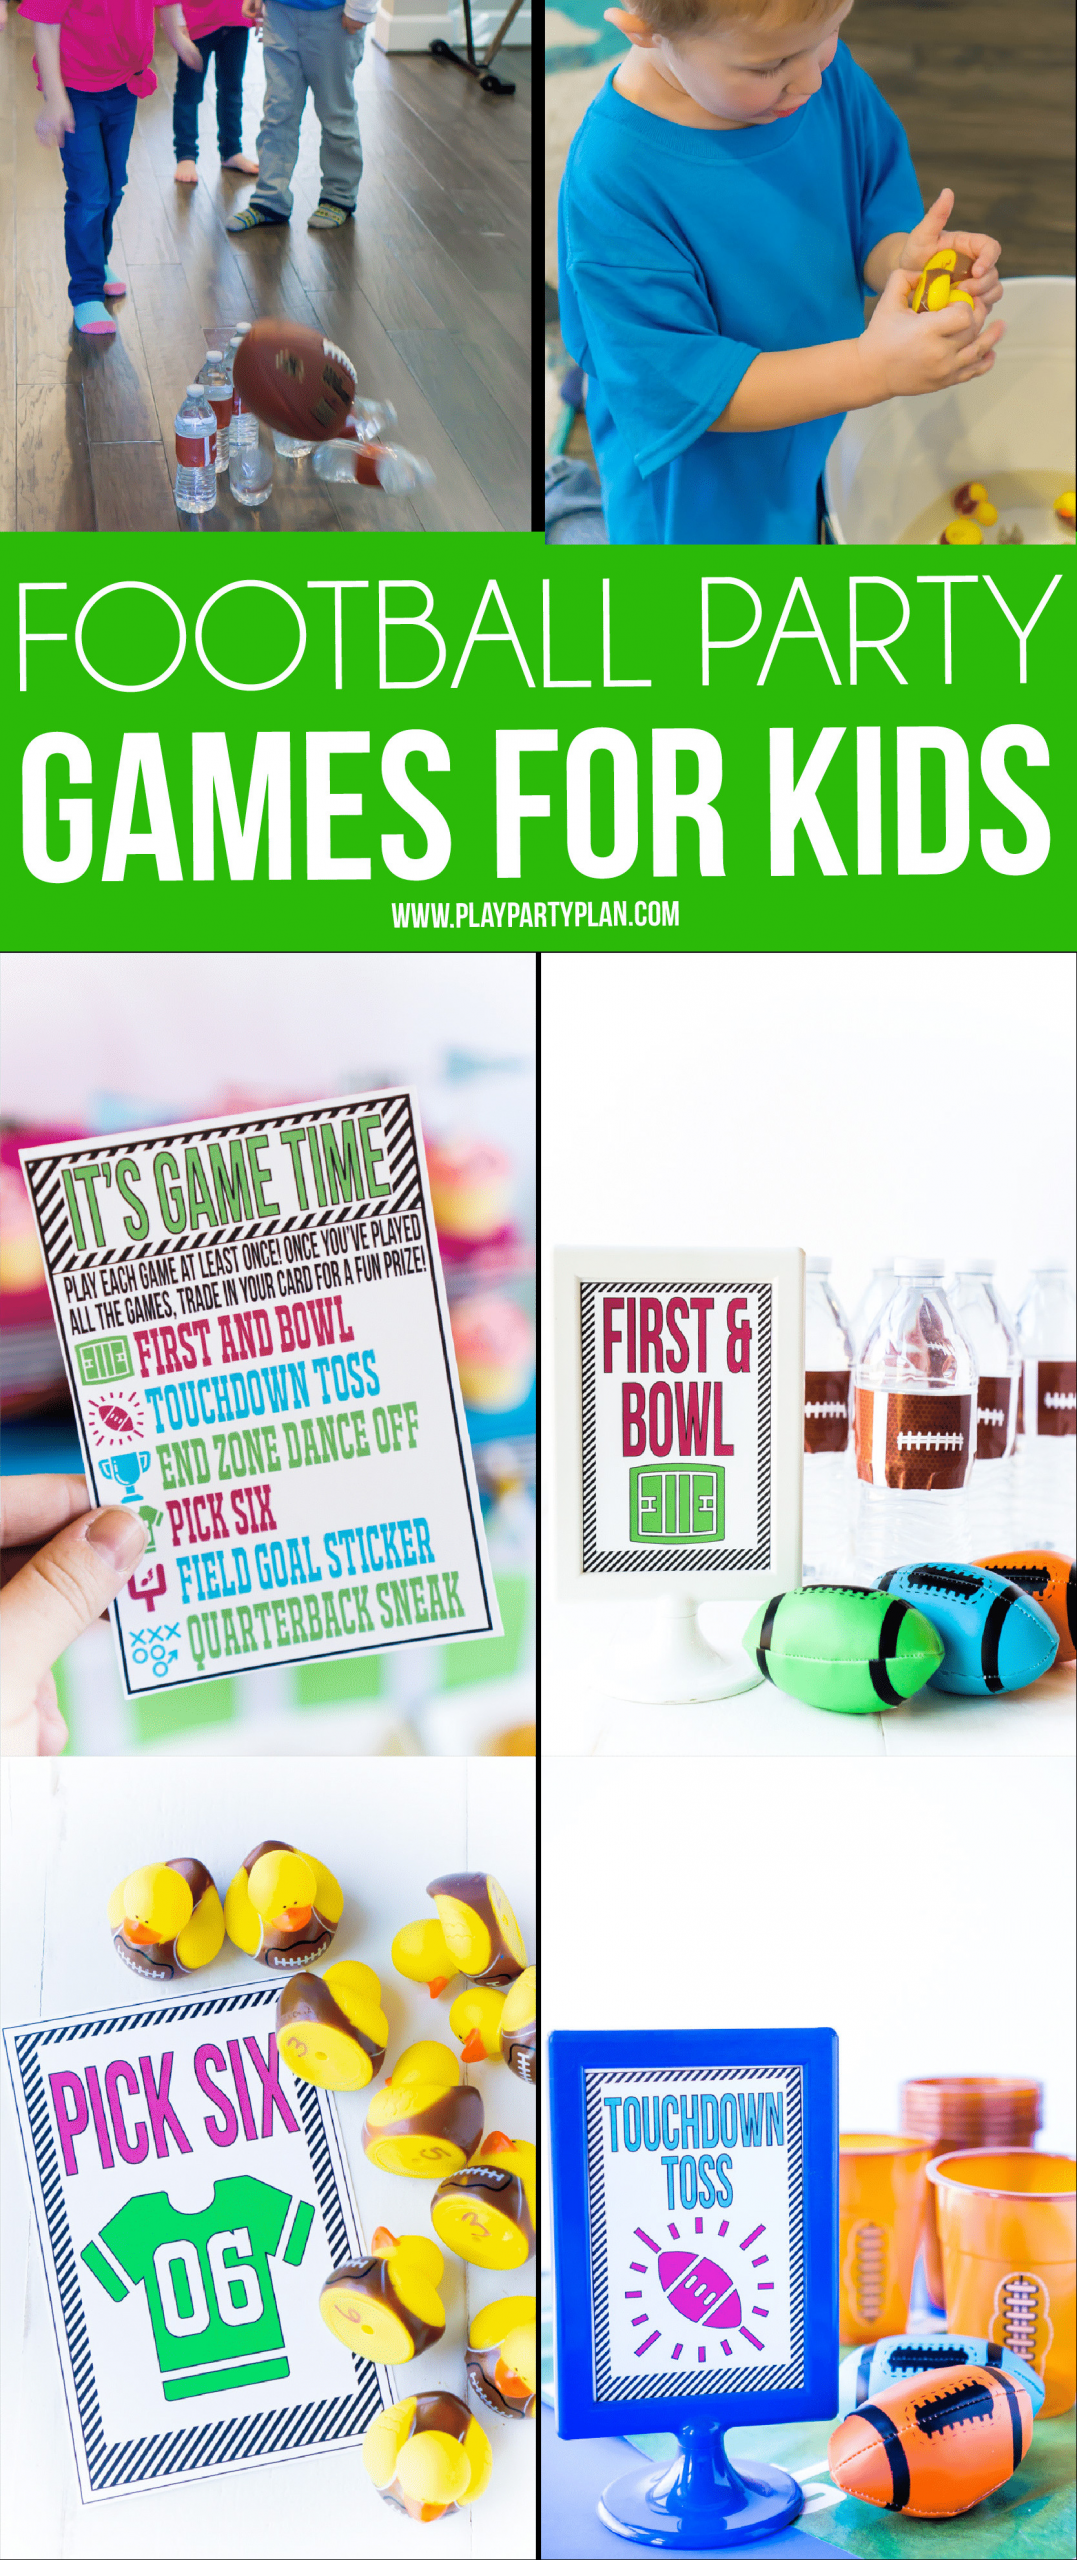 Football Party Ideas For Kids
 Football Party Games for Kids and Other Touchdown Worthy